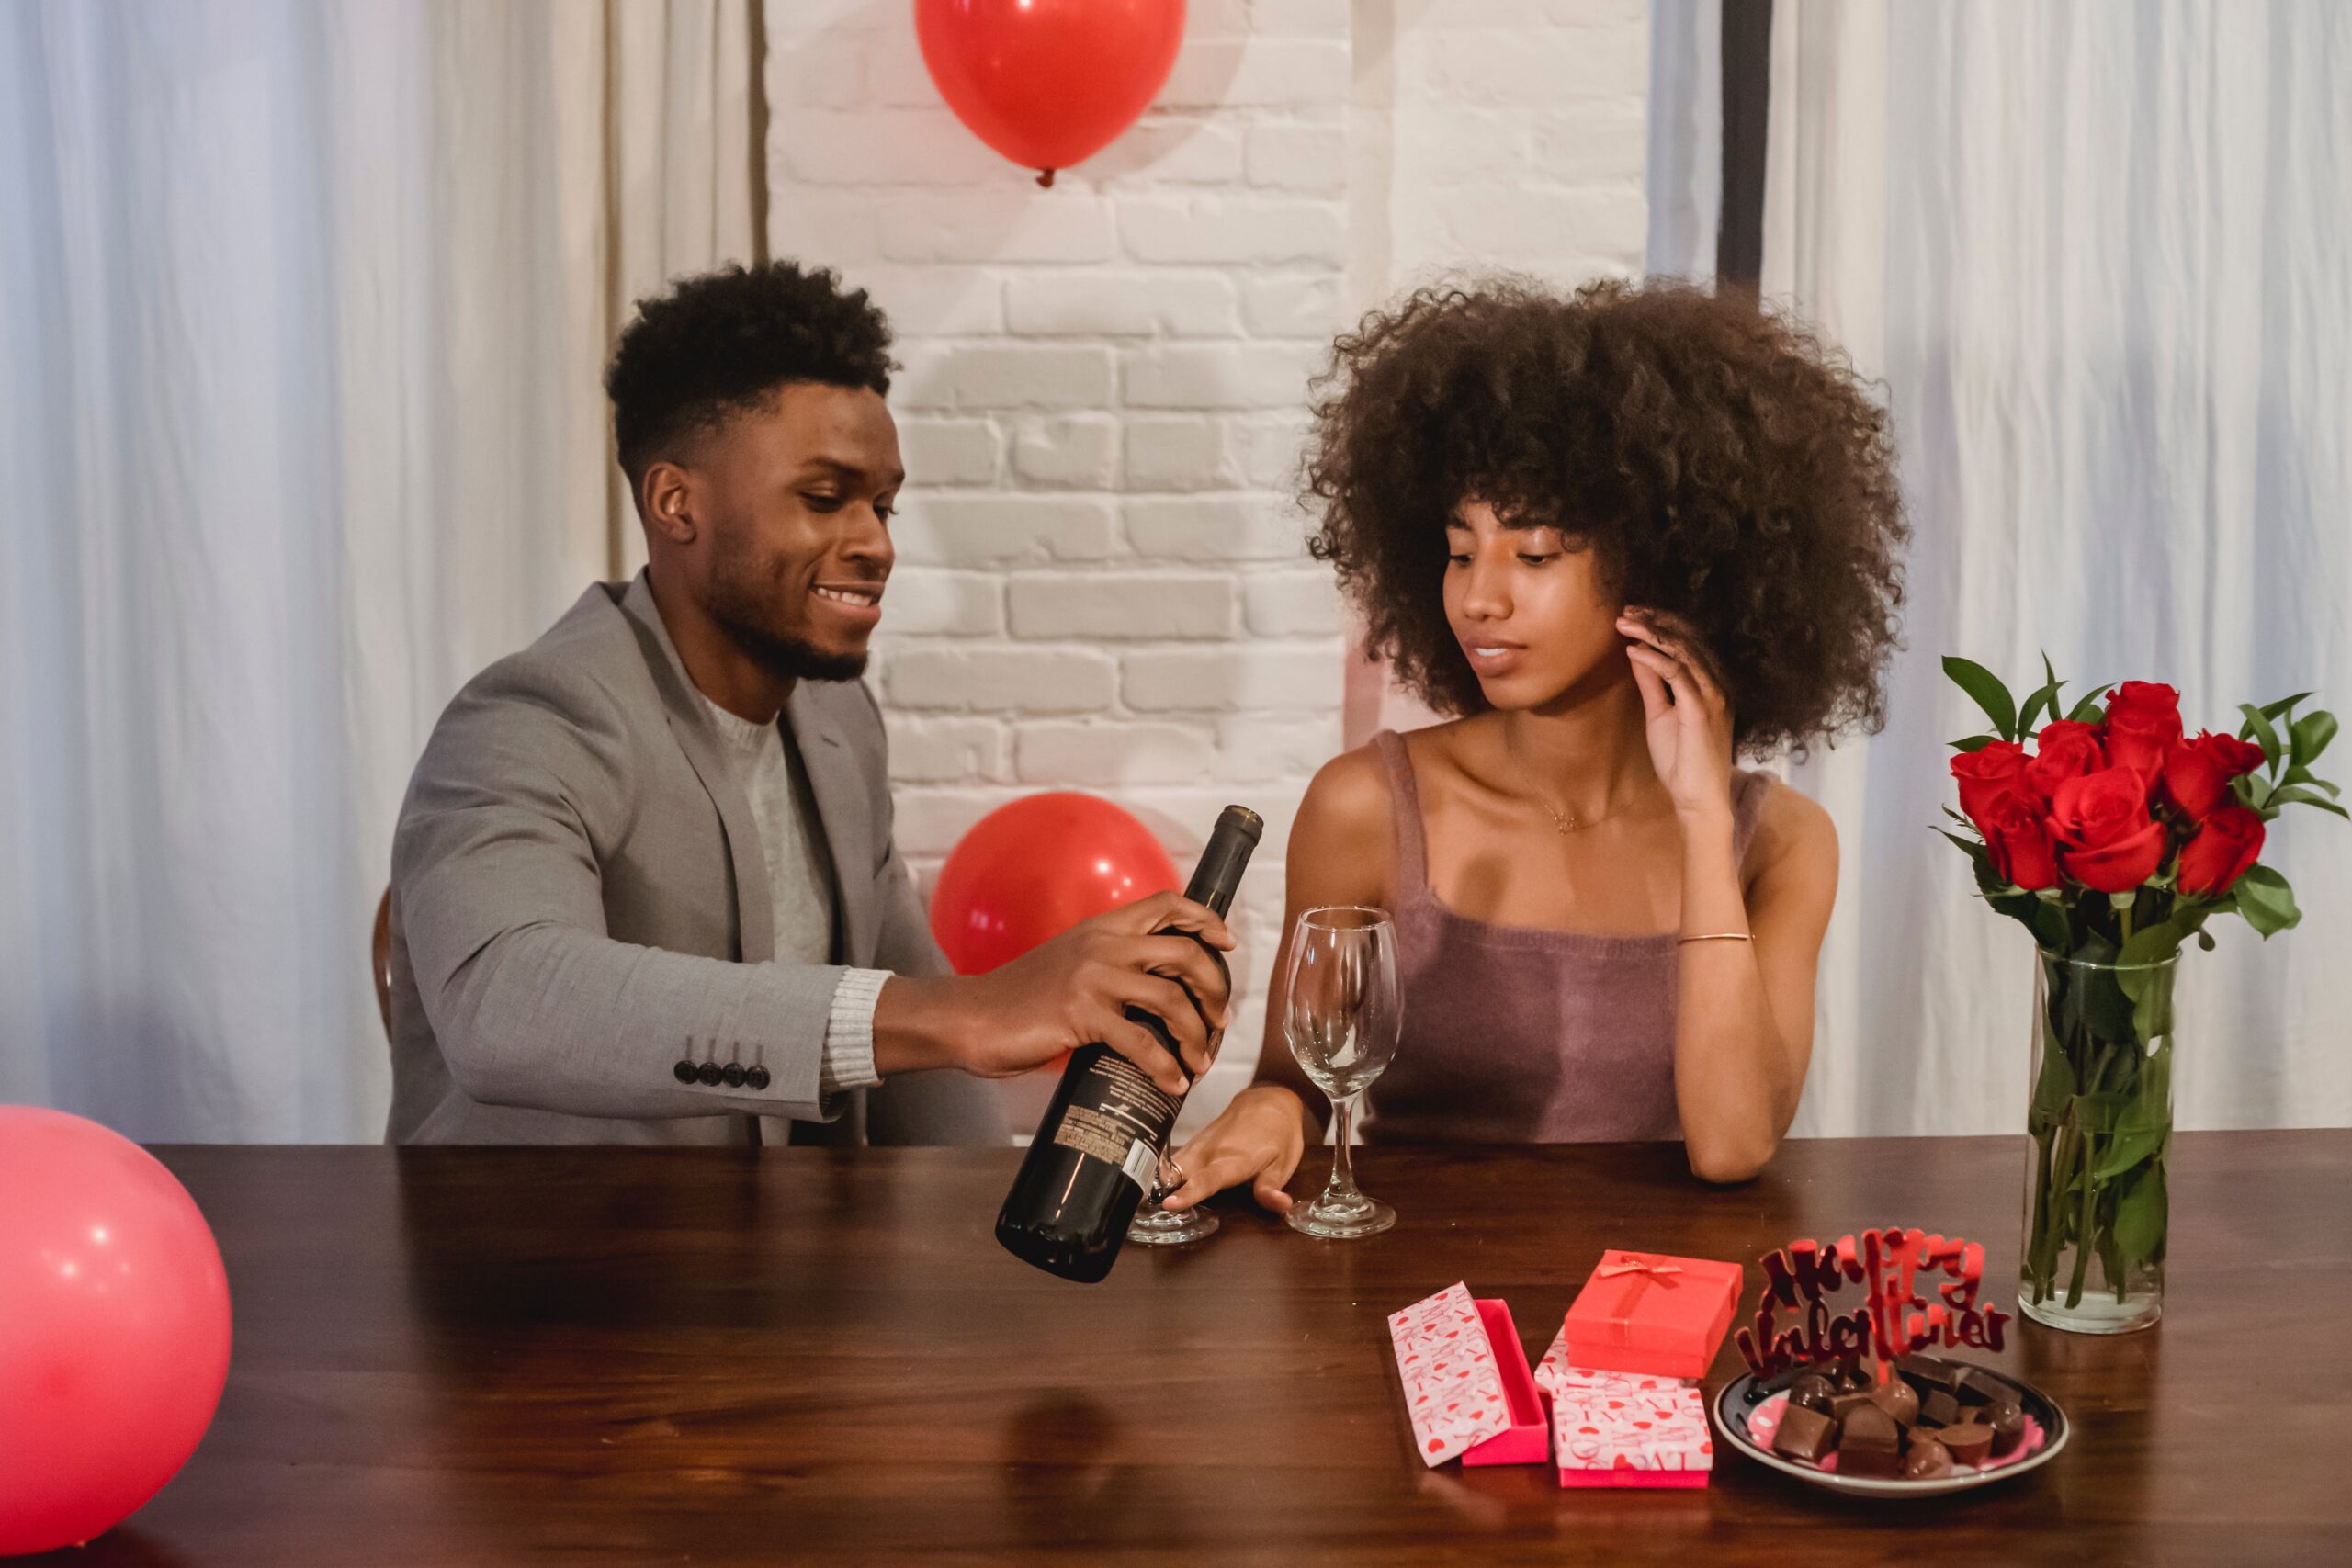 Chaste Inegbedion: How to Enjoy The Valentine’s Day As Travel Lovers